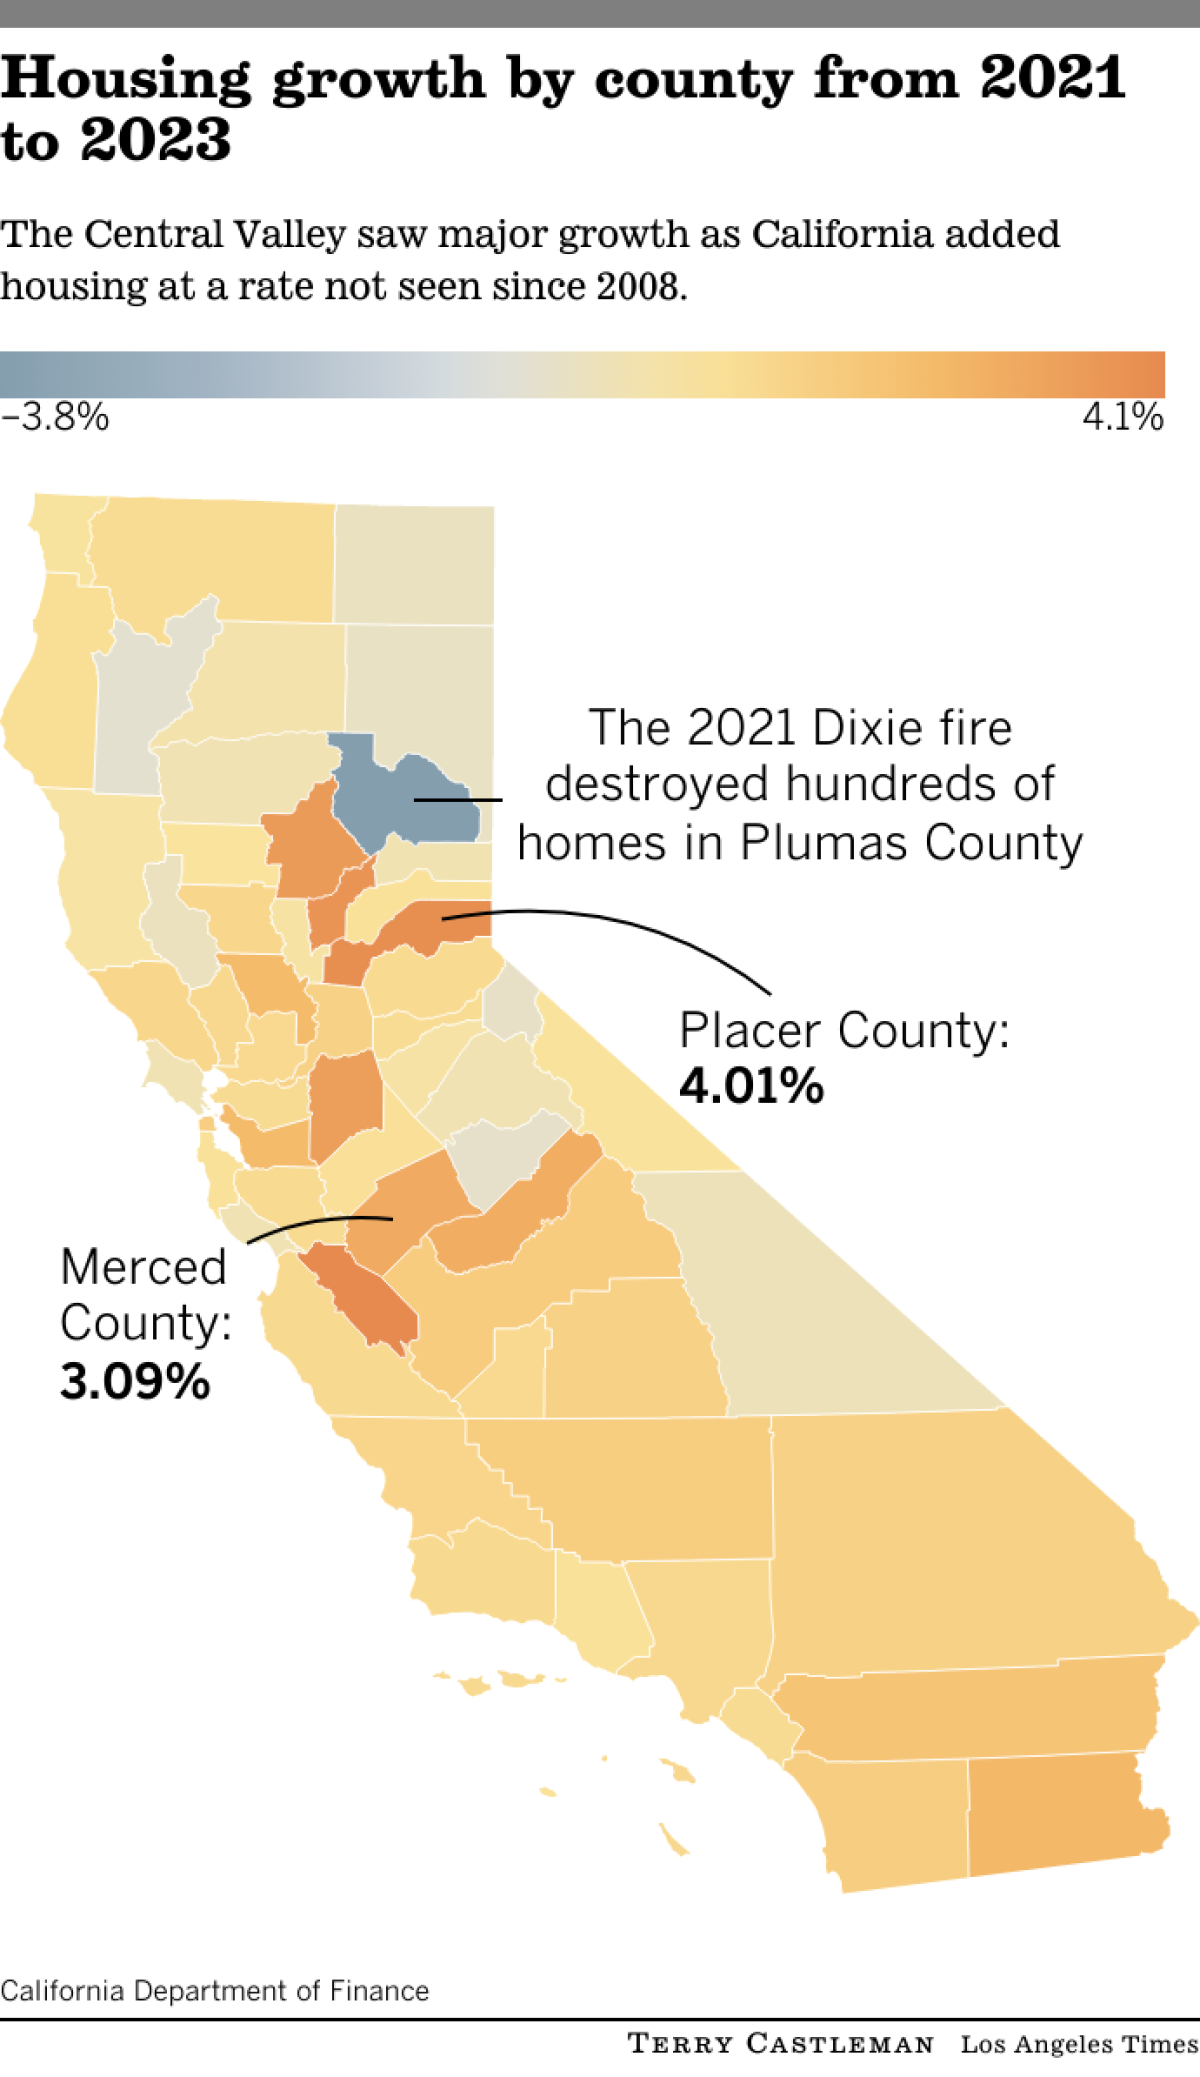 A map showing housing growth rates for each of California's 58 counties.